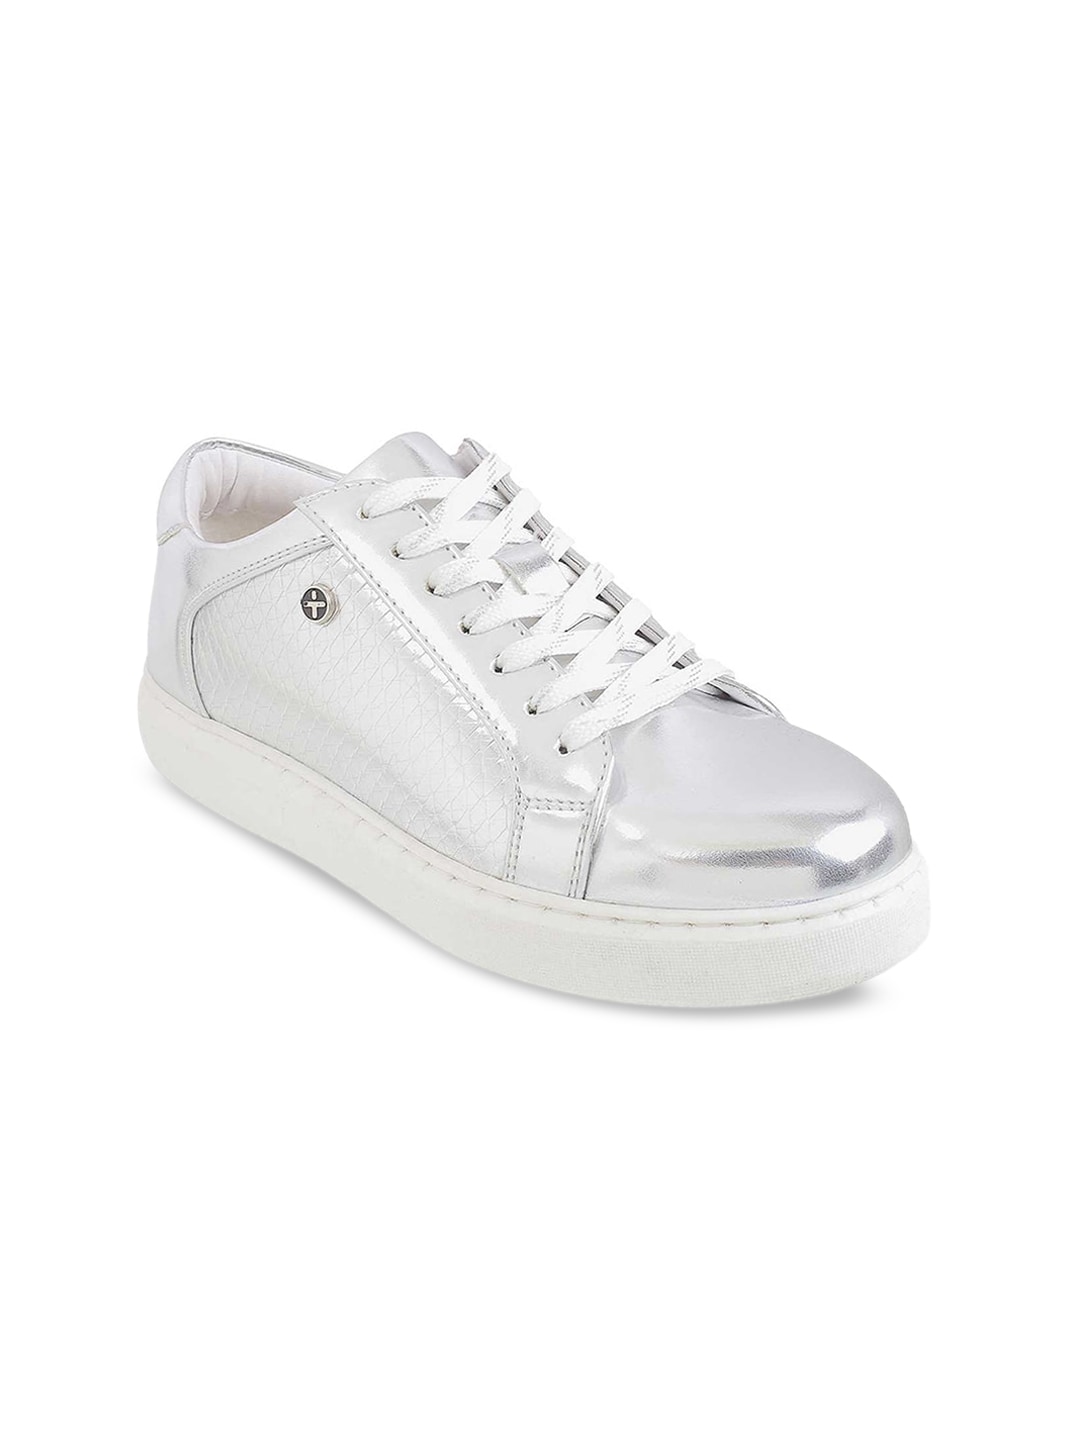 Metro Women Silver-Toned Textured Sneakers Price in India